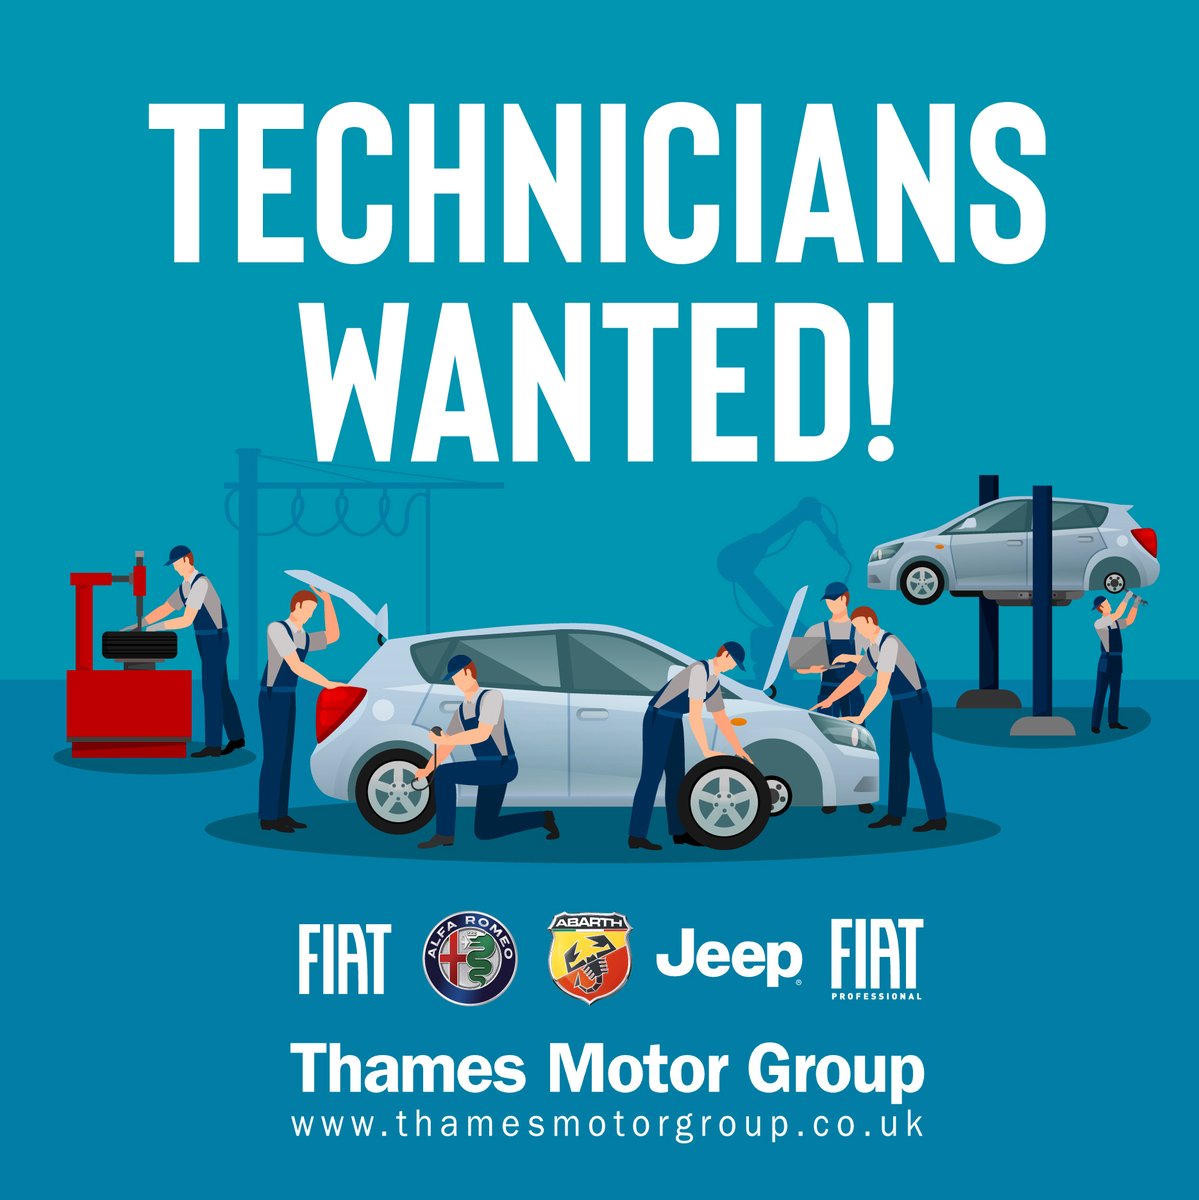 New Year, New Job! 🔧 We're looking for technicians to join our winning team on Bath Road, Slough. As a main dealer for 5 fantastic brands, this is an exciting role and will involve a wide variety of technical work. Learn more and apply here: thamesmotorgroup.co.uk/recruitment/ #PleaseRT